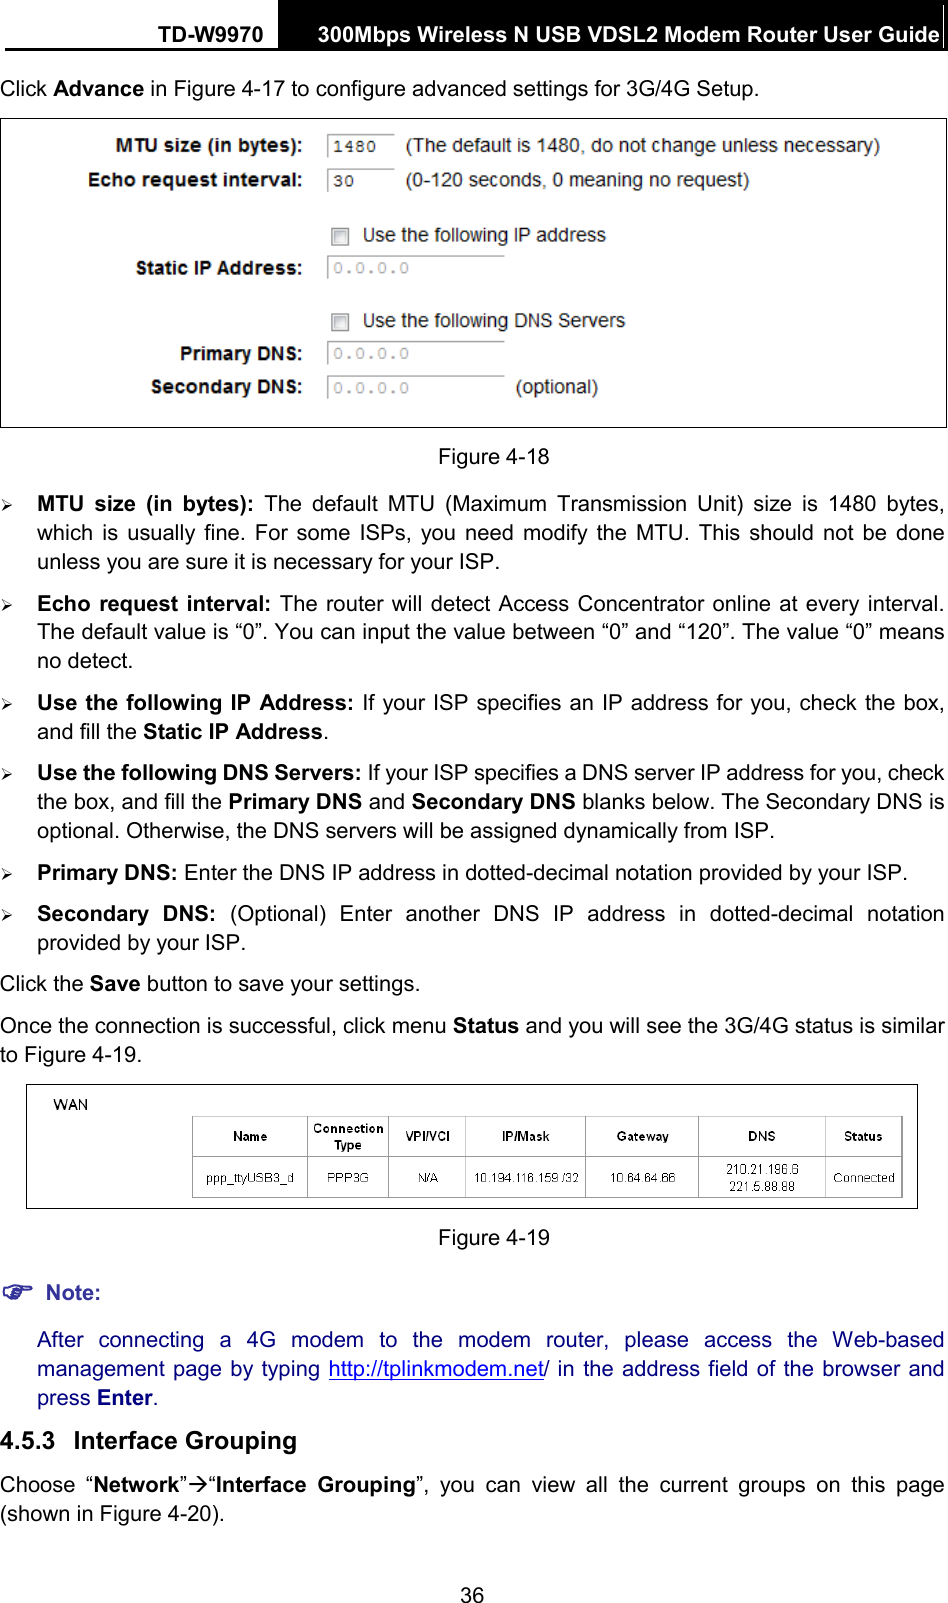 TD-W9970 300Mbps Wireless N USB VDSL2 Modem Router User Guide  Click Advance in Figure 4-17 to configure advanced settings for 3G/4G Setup.  Figure 4-18  MTU  size  (in bytes): The default MTU (Maximum Transmission Unit) size is 1480 bytes, which is usually fine. For some ISPs, you need modify the MTU. This should not be done unless you are sure it is necessary for your ISP.  Echo request interval: The router will detect Access Concentrator online at every interval. The default value is “0”. You can input the value between “0” and “120”. The value “0” means no detect.  Use the following IP Address: If your ISP specifies an IP address for you, check the box, and fill the Static IP Address.  Use the following DNS Servers: If your ISP specifies a DNS server IP address for you, check the box, and fill the Primary DNS and Secondary DNS blanks below. The Secondary DNS is optional. Otherwise, the DNS servers will be assigned dynamically from ISP.  Primary DNS: Enter the DNS IP address in dotted-decimal notation provided by your ISP.  Secondary DNS:  (Optional) Enter another DNS IP address in dotted-decimal notation provided by your ISP. Click the Save button to save your settings. Once the connection is successful, click menu Status and you will see the 3G/4G status is similar to Figure 4-19.  Figure 4-19  Note: After connecting a 4G modem to the modem router,  please access the Web-based management page by typing http://tplinkmodem.net/ in the address field of the browser and press Enter. 4.5.3 Interface Grouping Choose  “Network”“Interface Grouping”, you can view all the current groups on this page (shown in Figure 4-20).   36 